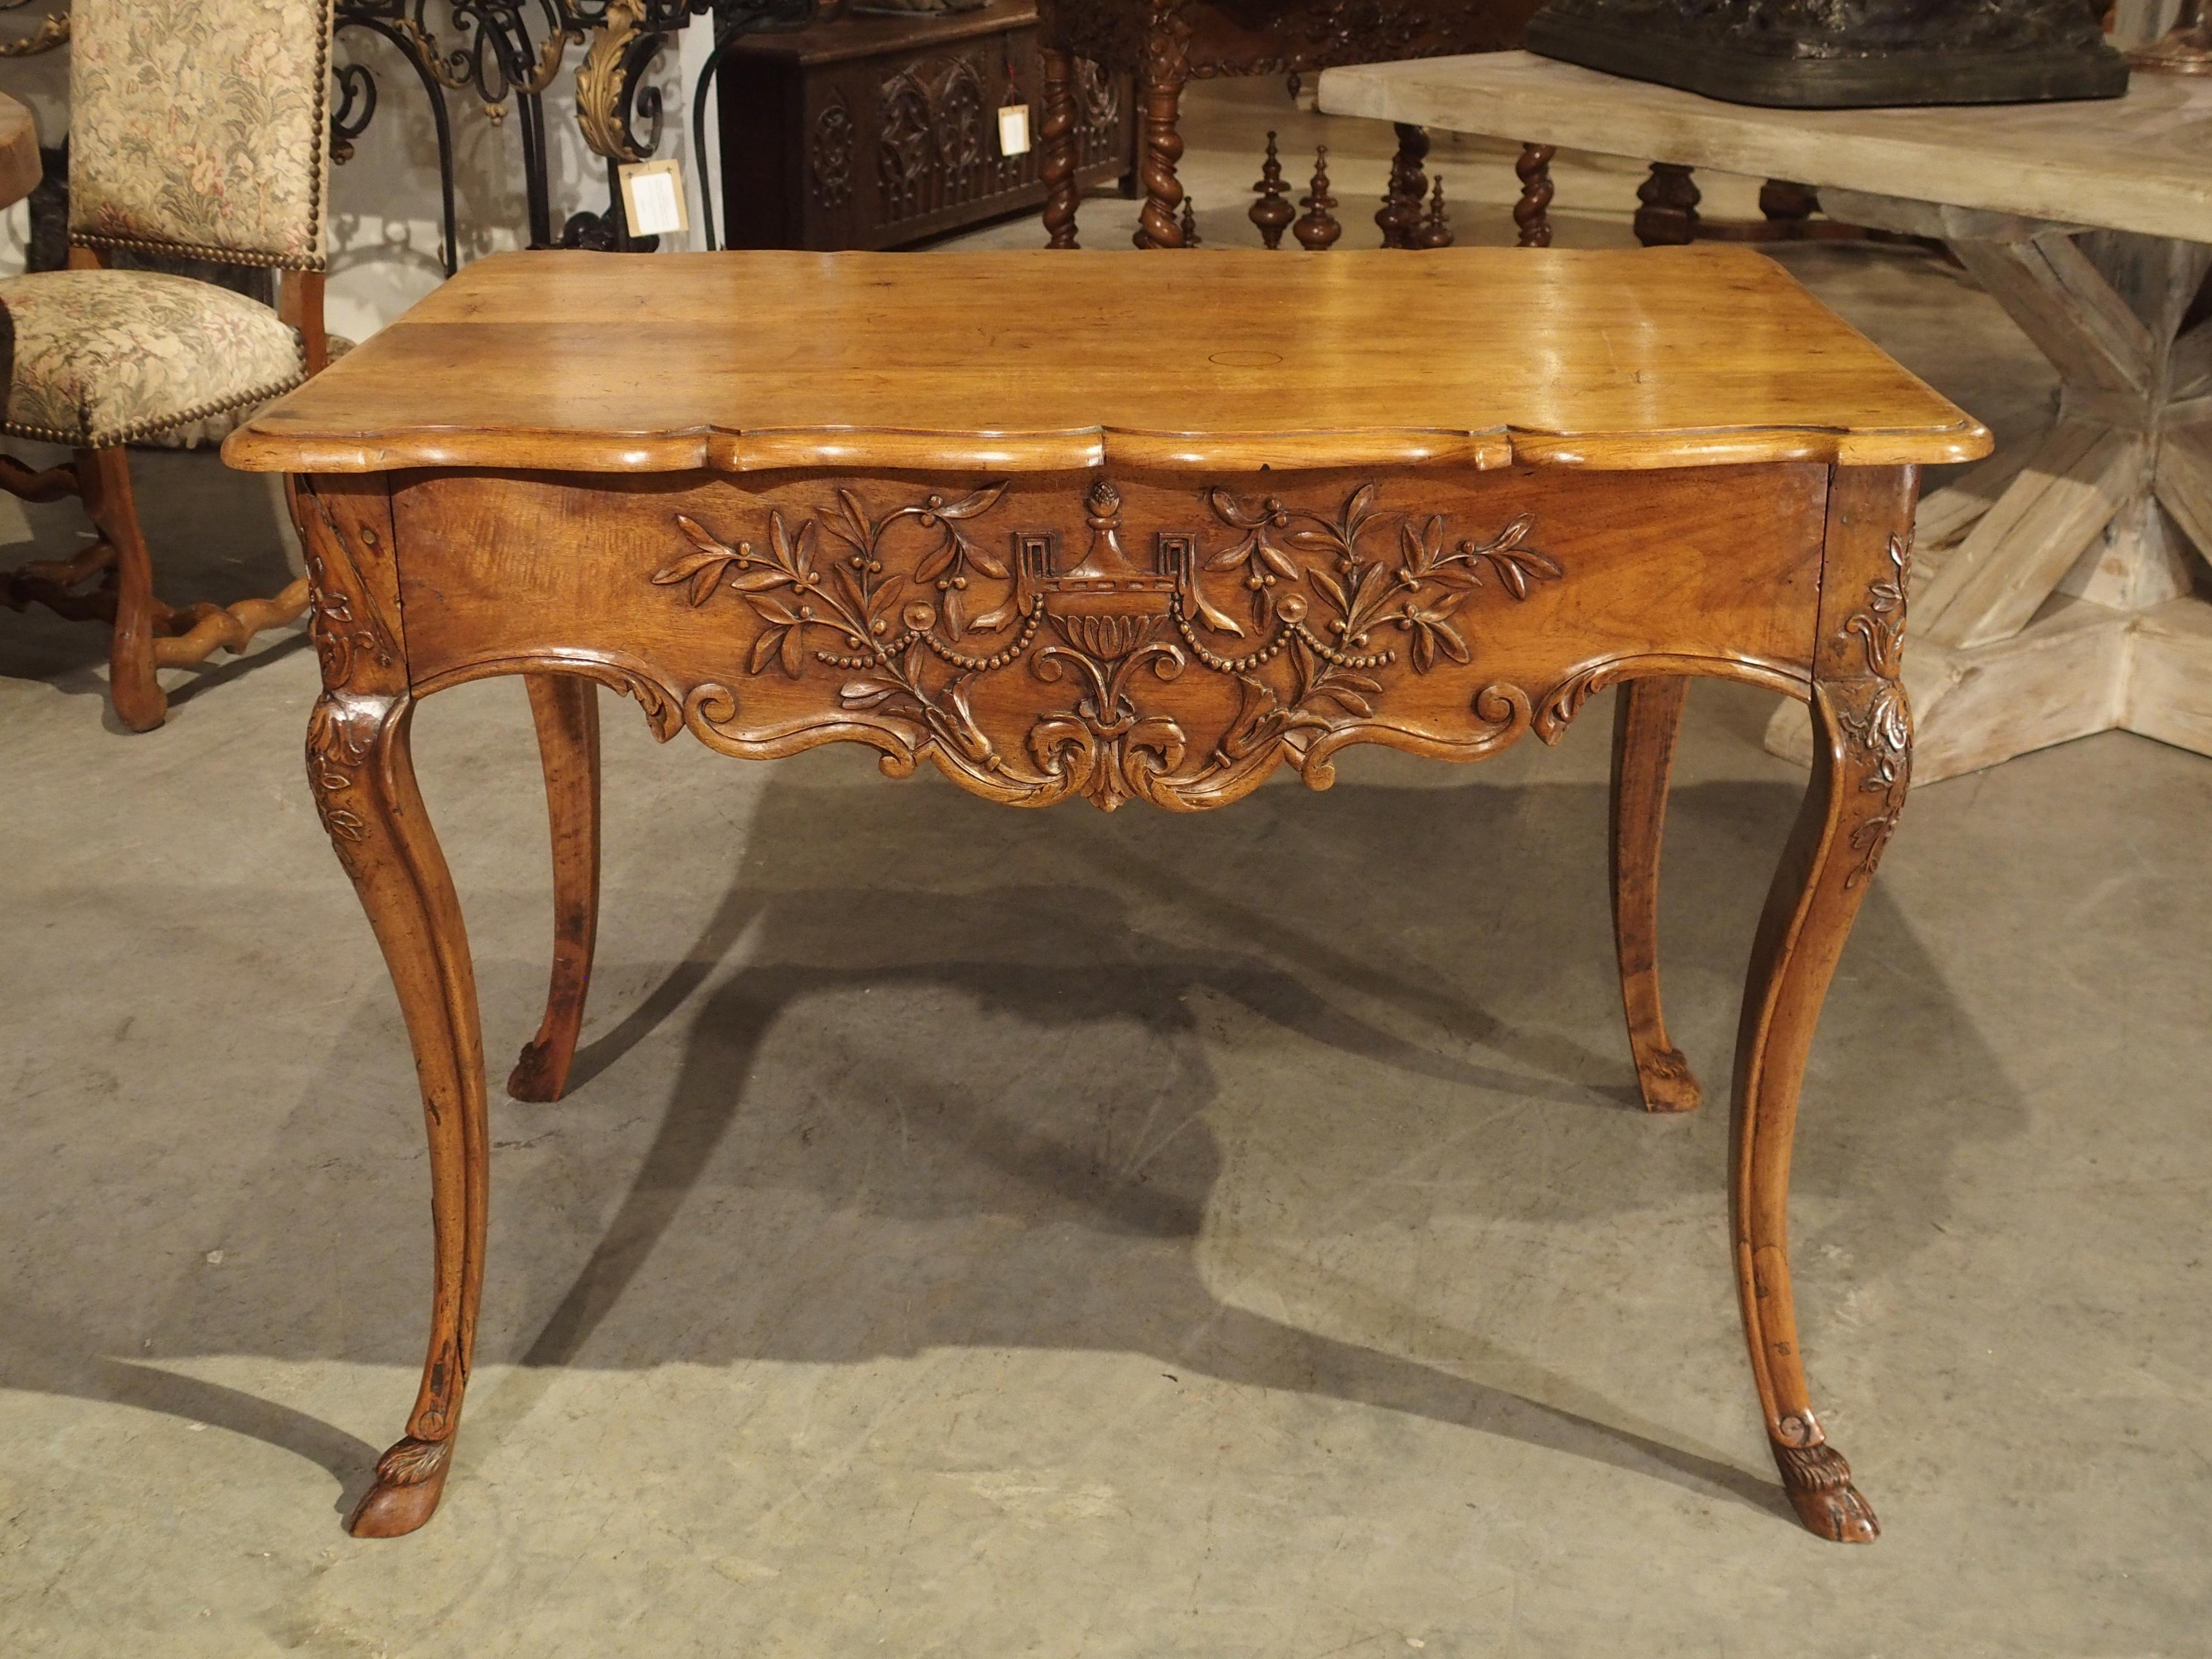 Walnut Antique French Regence Style Console Table with Front Drawer and Hoof Feet